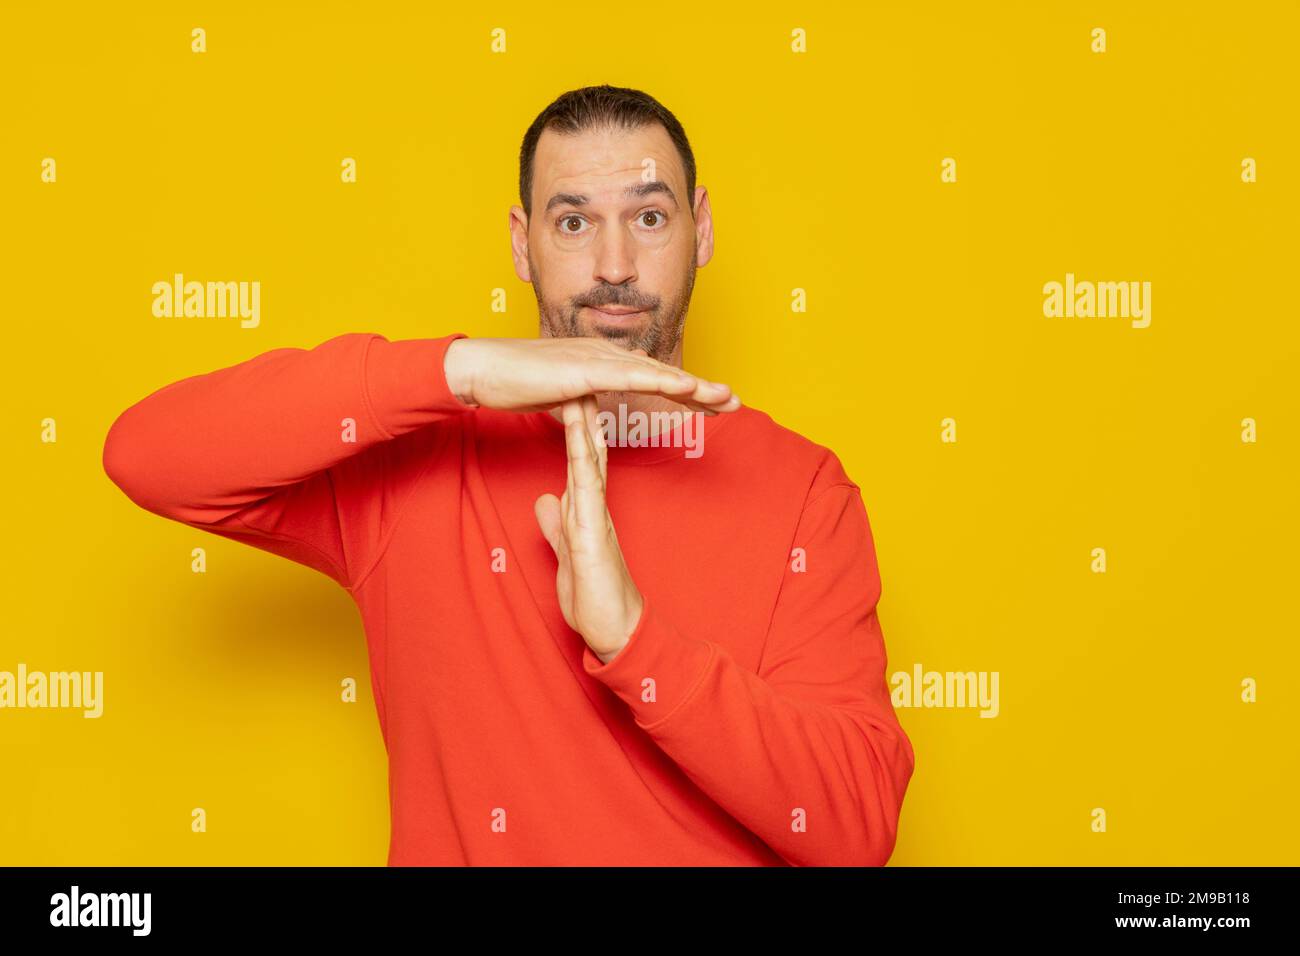 Latino man with a beard in a red sweatshirt making the time-out gesture, he needs a break from the pace of life demanded of middle-class people Stock Photo